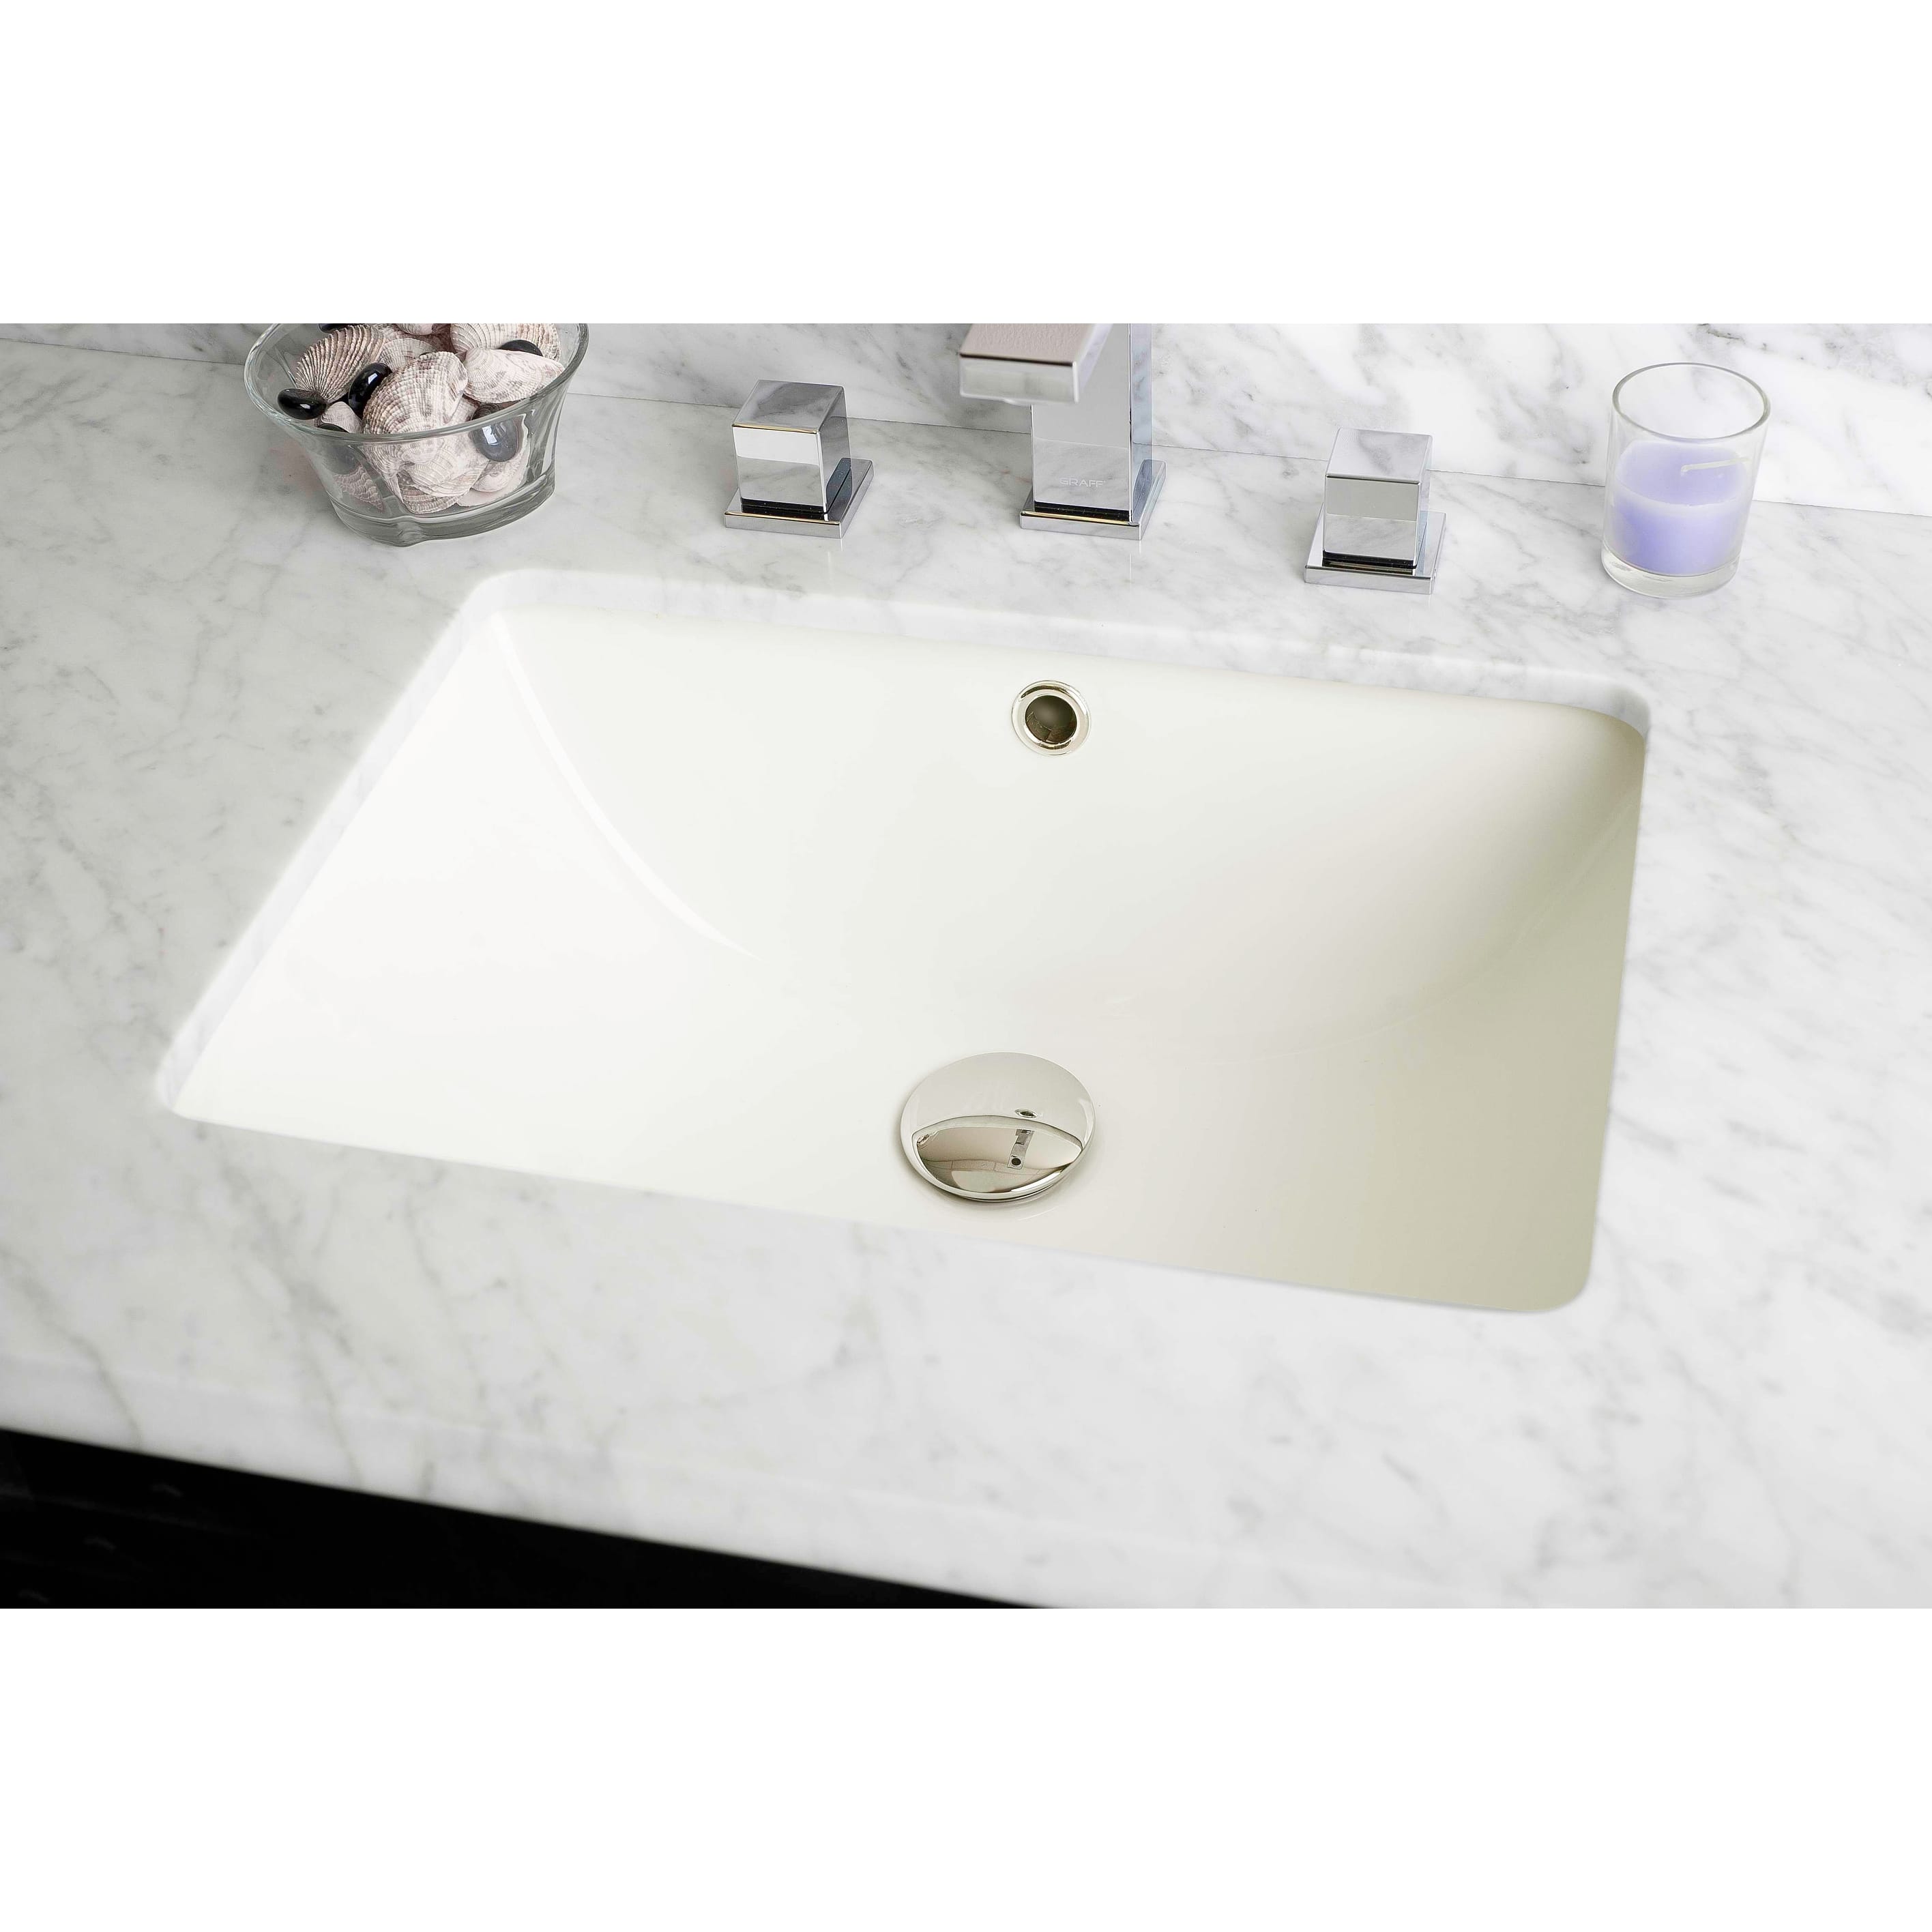 18.25-in. W CUPC Rectangle Undermount Sink Set In Biscuit - Chrome Hardware With 1 Hole CUPC Faucet - Overflow Drain Incl.